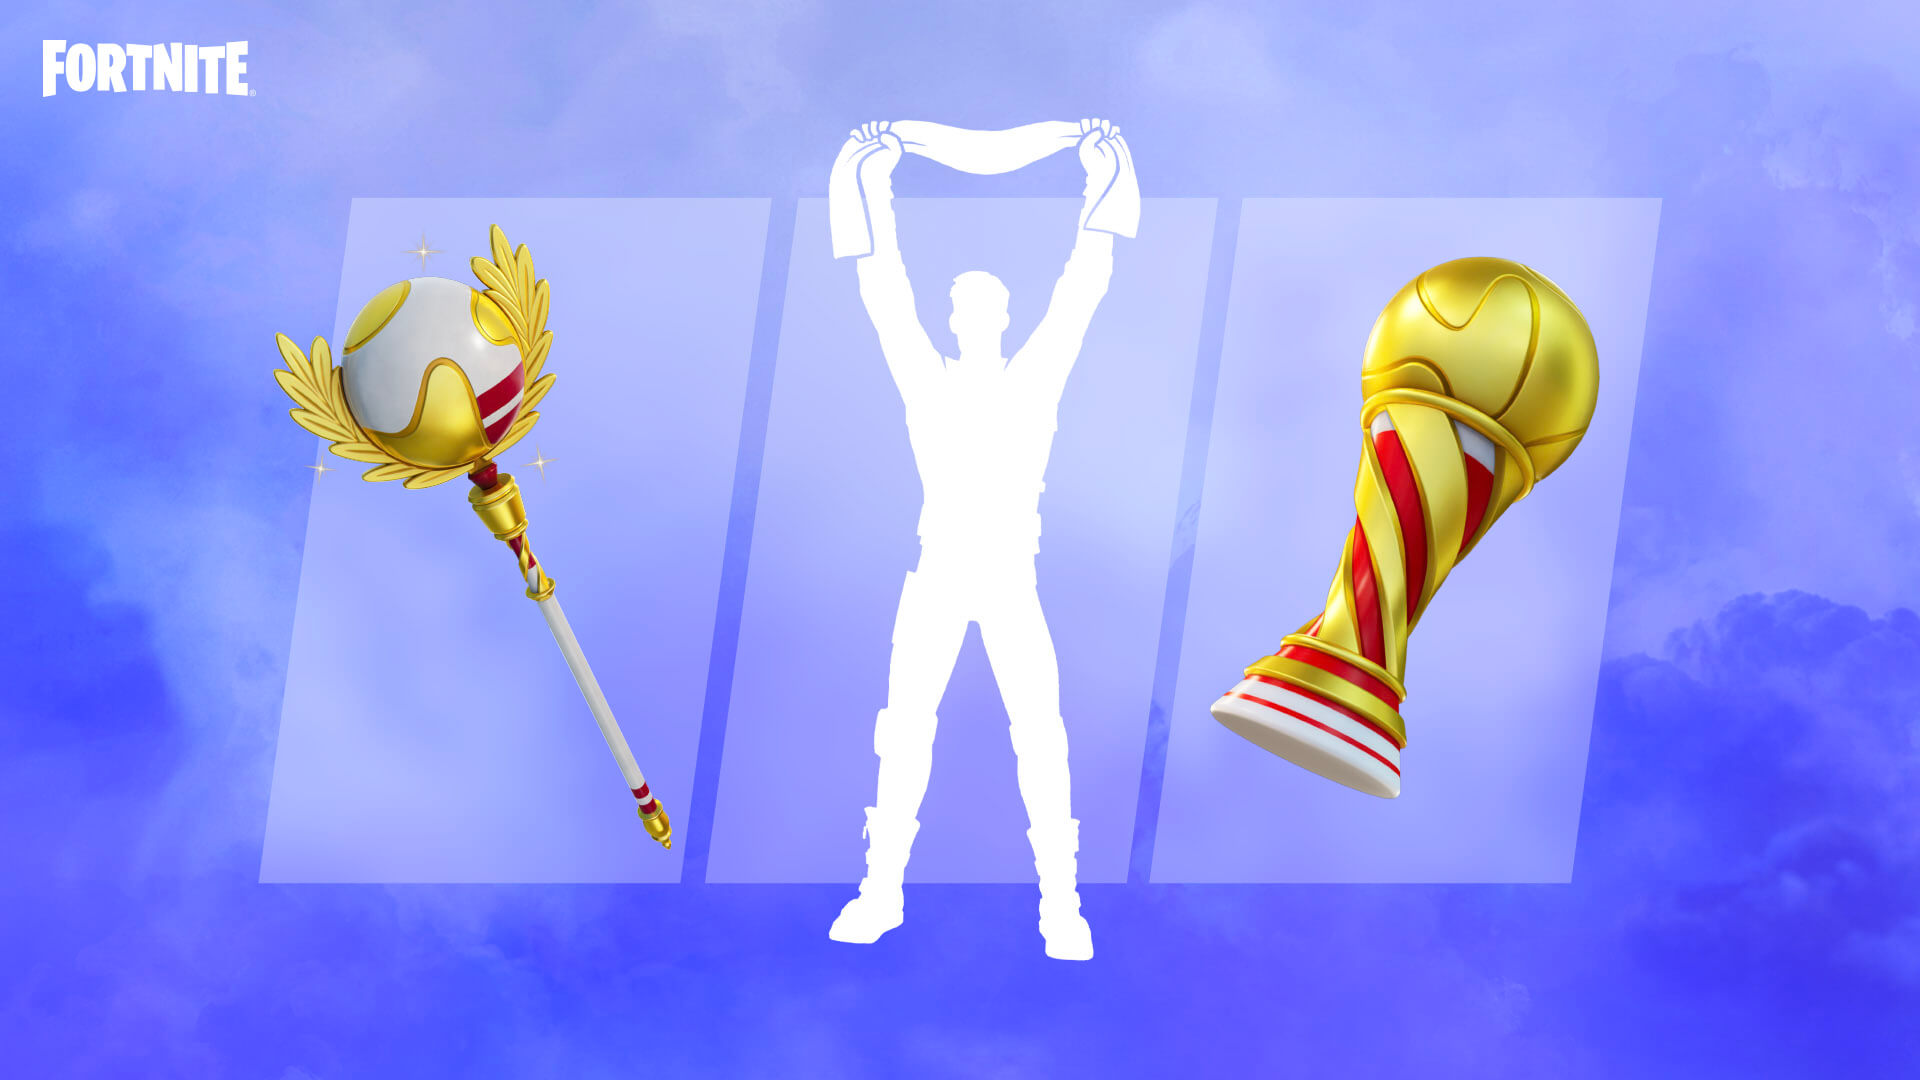 Fortnite reveals new Let Them Know Set, available November 21